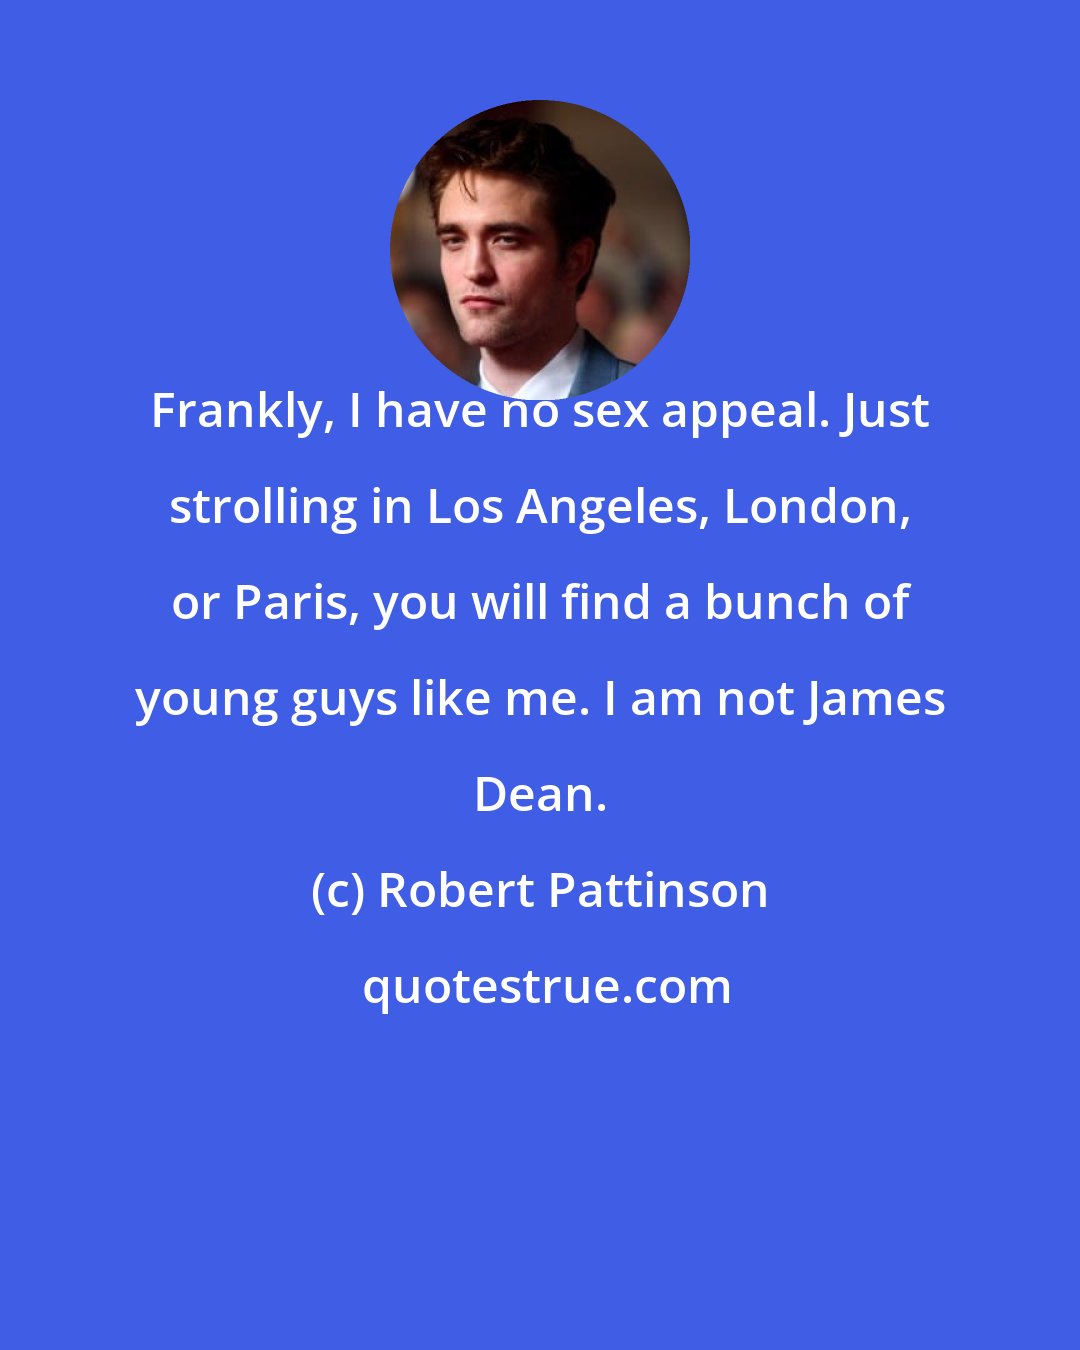 Robert Pattinson: Frankly, I have no sex appeal. Just strolling in Los Angeles, London, or Paris, you will find a bunch of young guys like me. I am not James Dean.